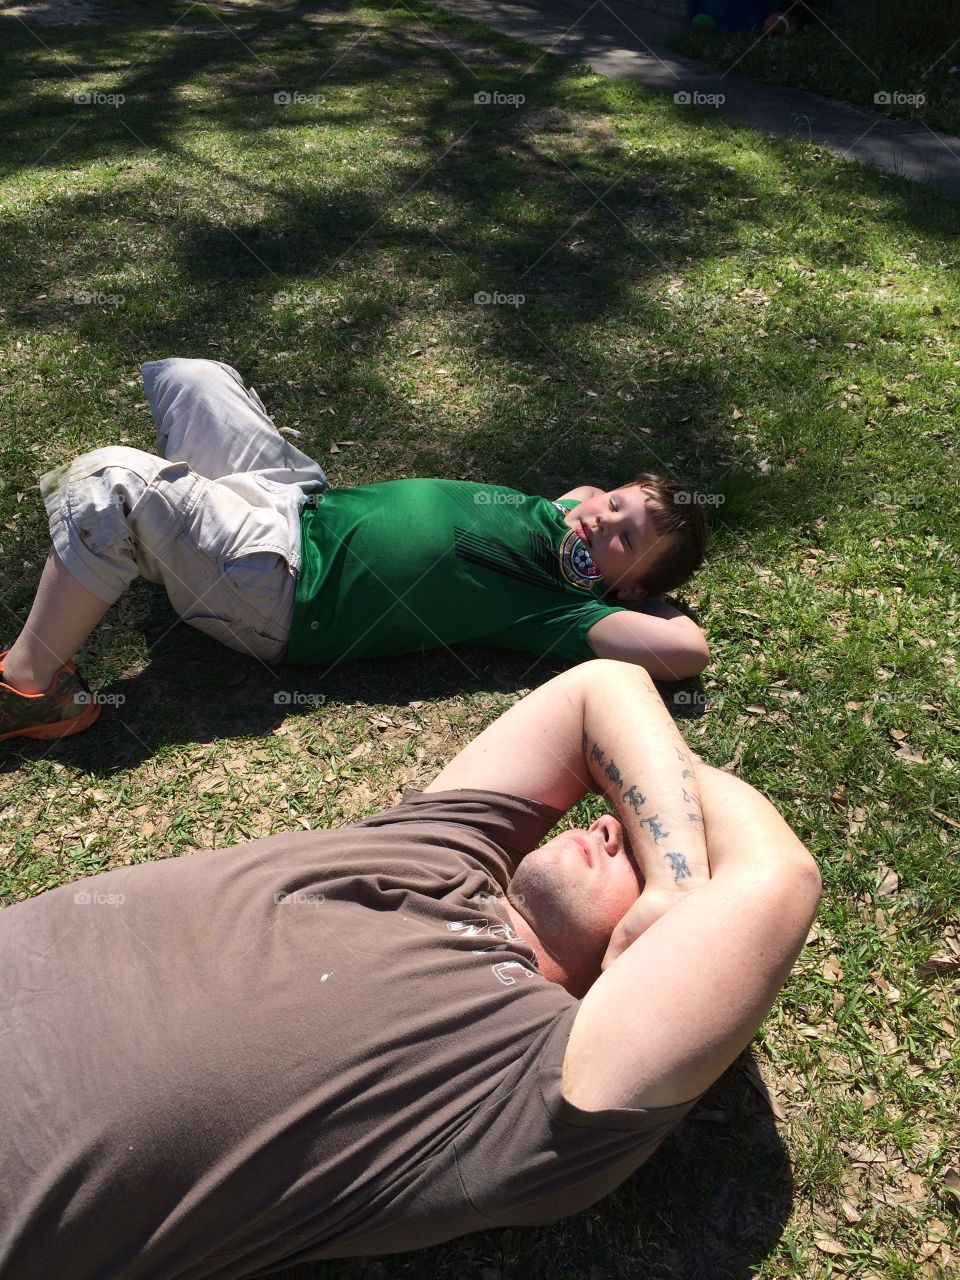 My husband and step son chillaxin in the grass. His son wanted to do everything his daddy was doing. Love this picture of them. Summer time fun memories!